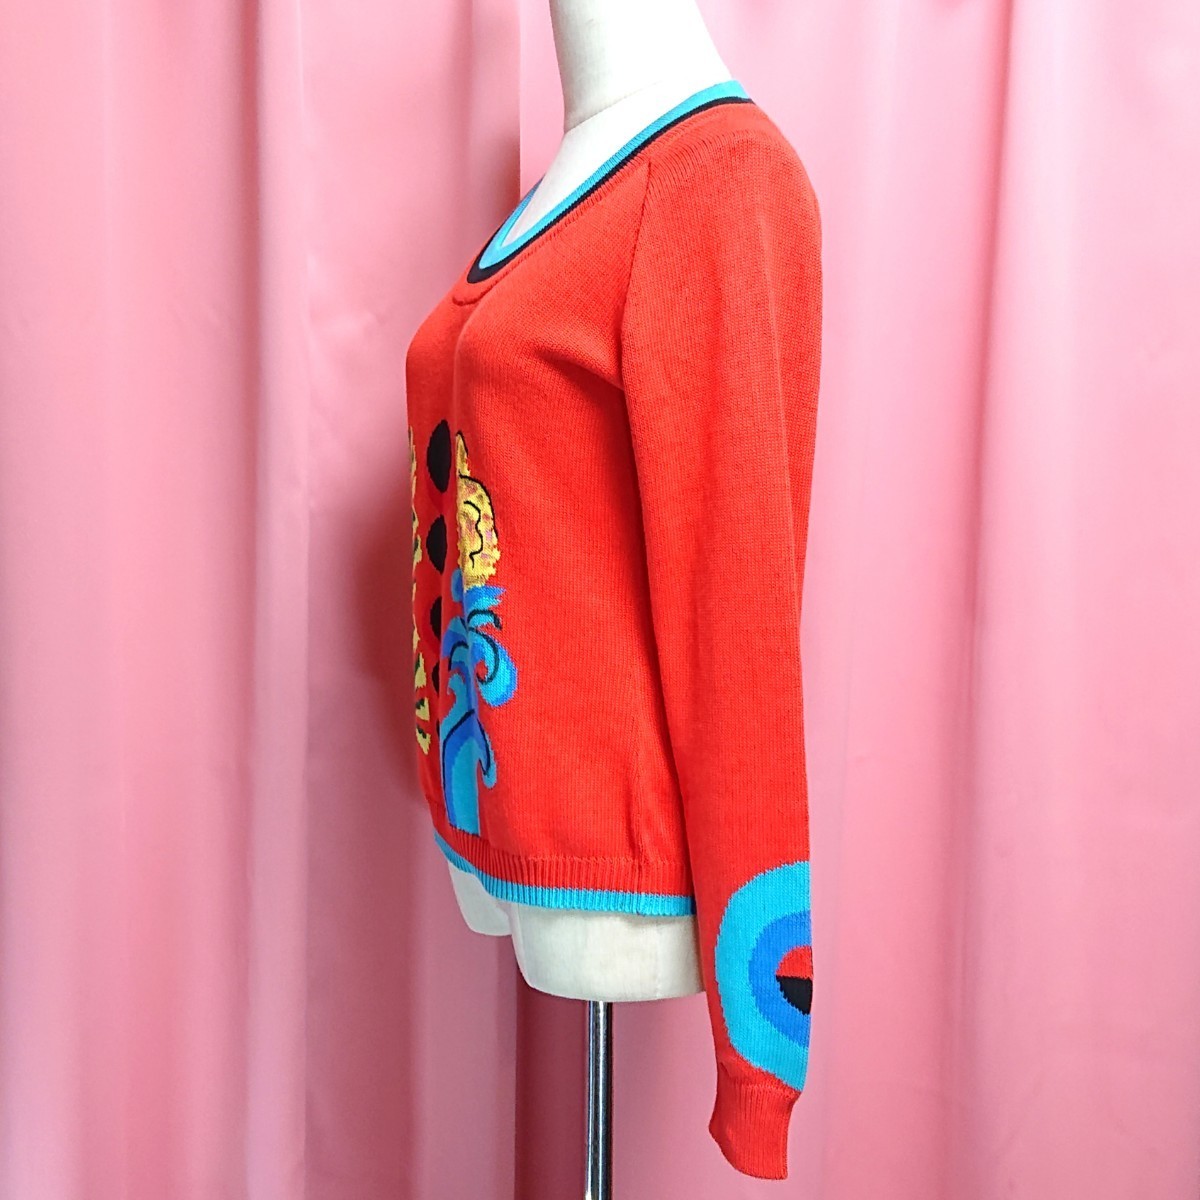  Italy made |GIANNI VERSACE| Gianni Versace .| Gianni Versace | tops | knitted | summer sweater 